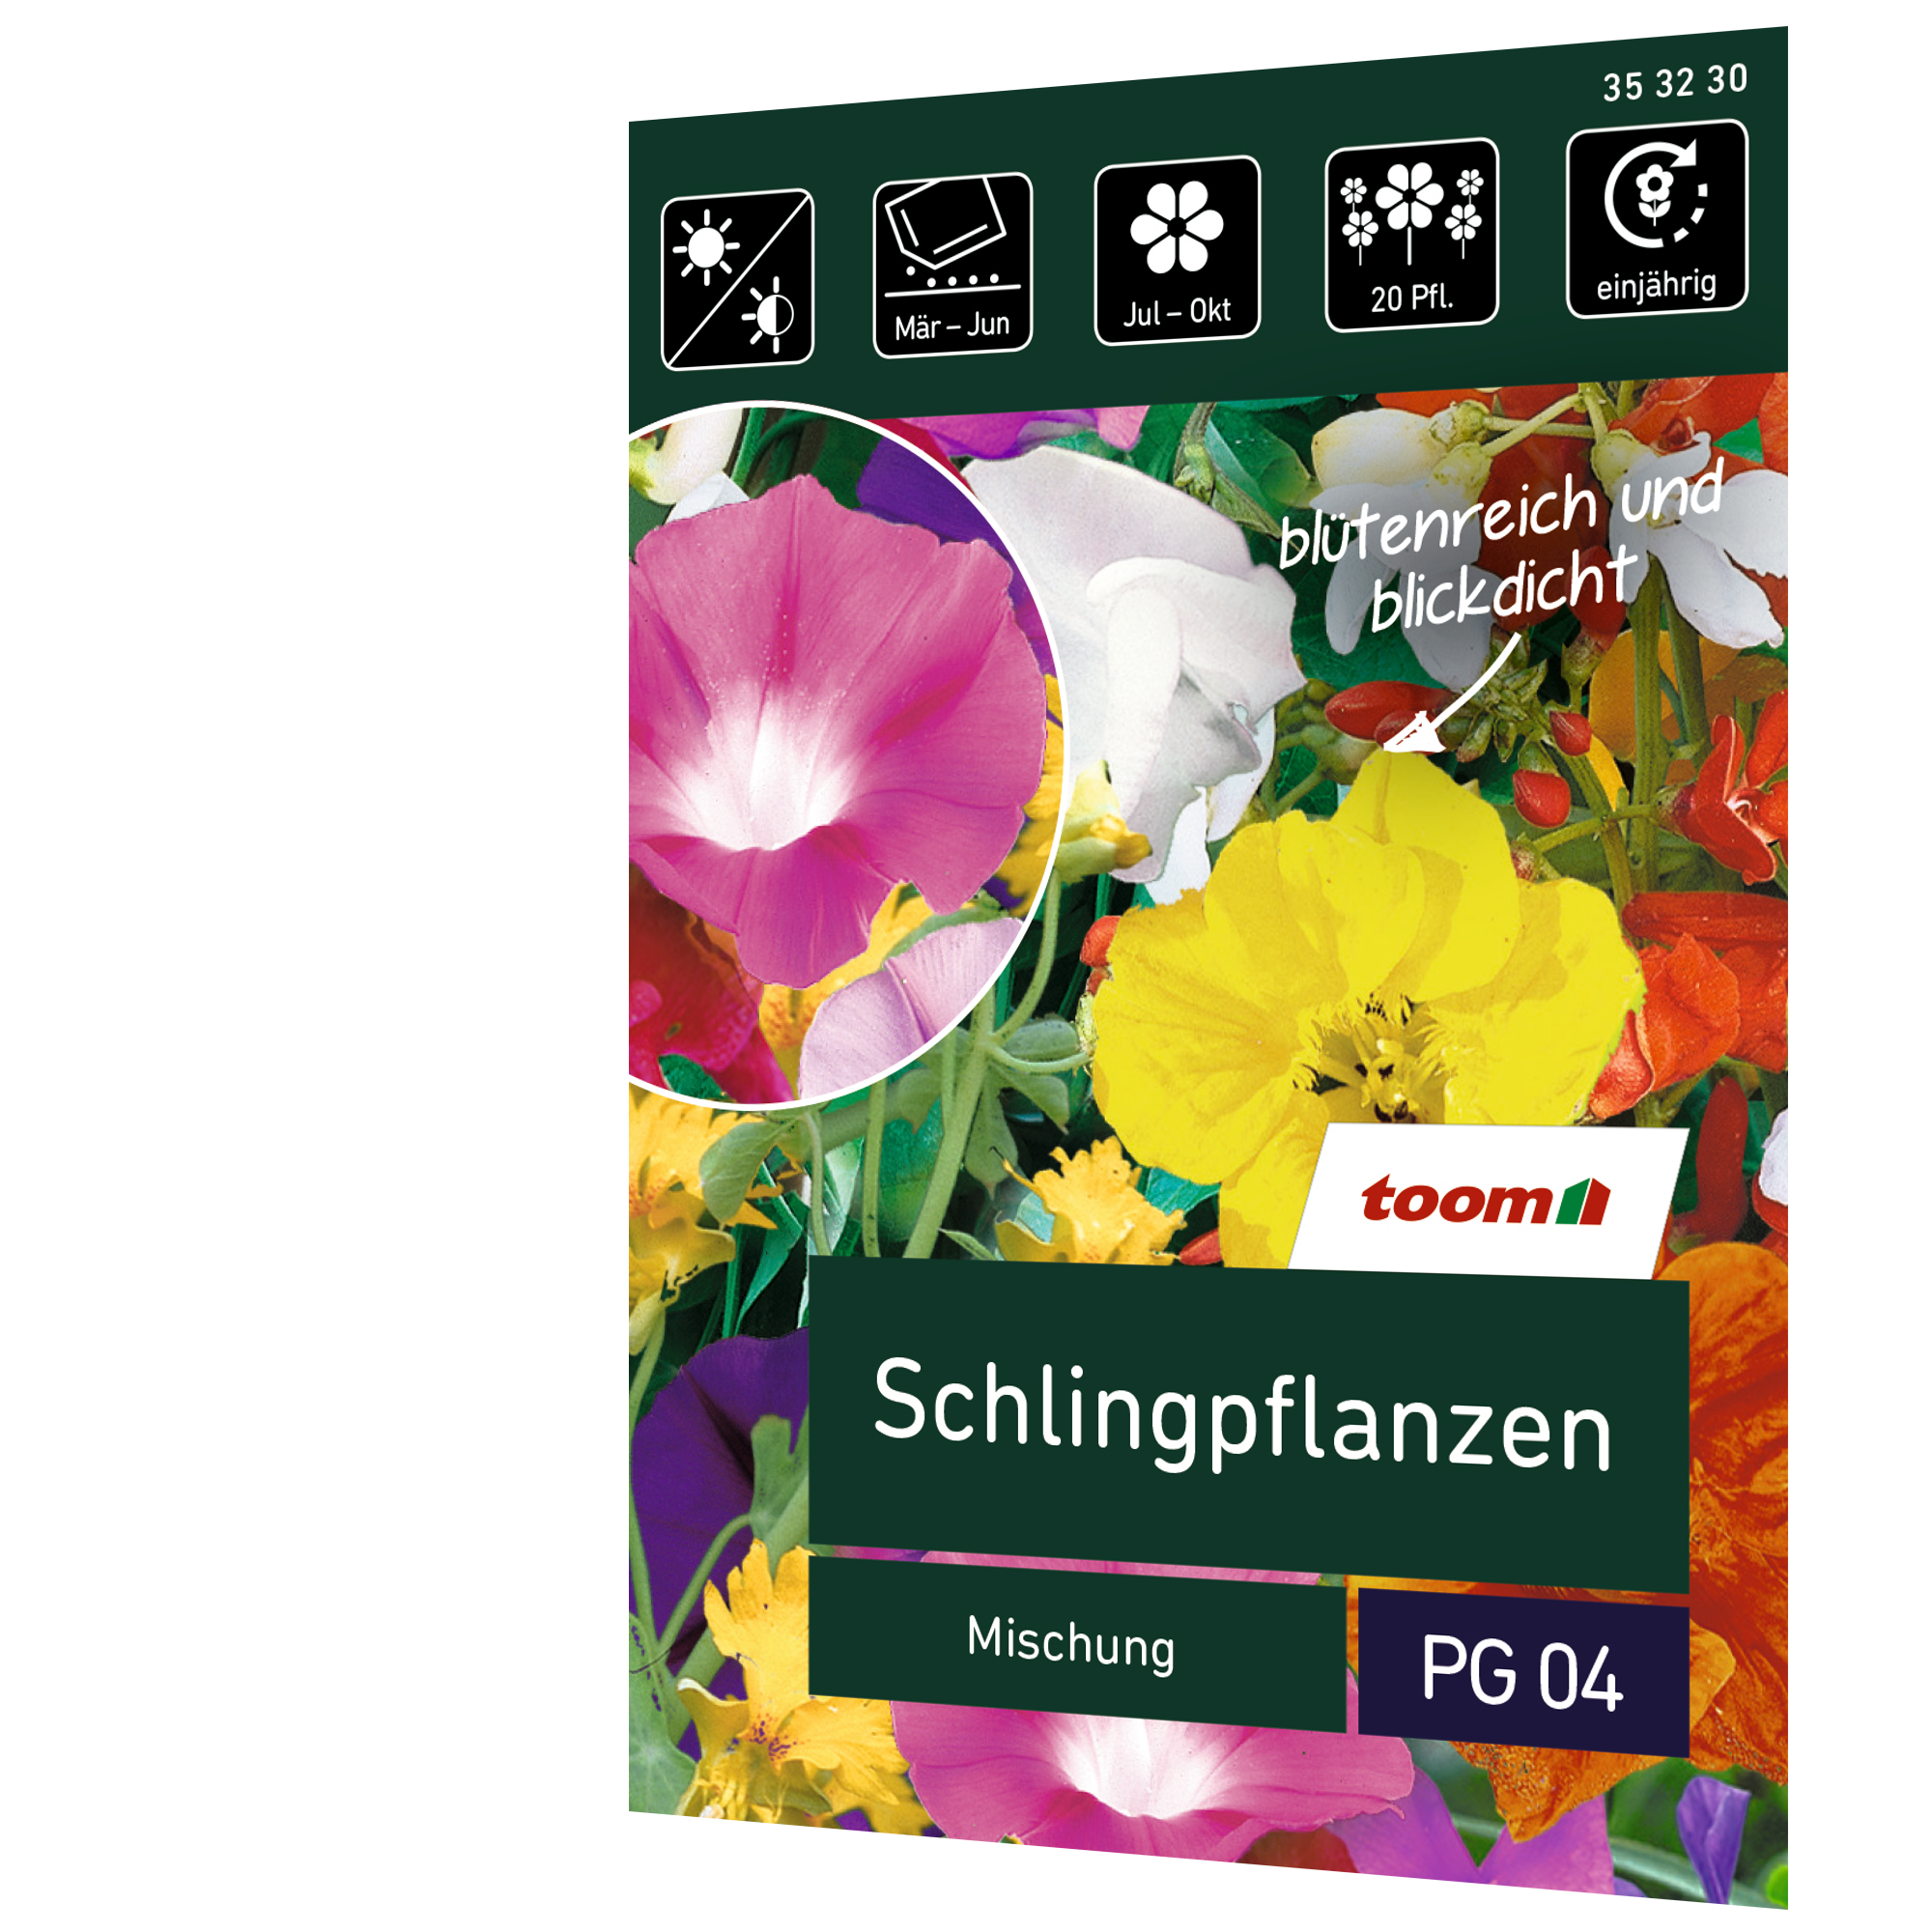 Schlingpflanzen 'Mischung' + product picture